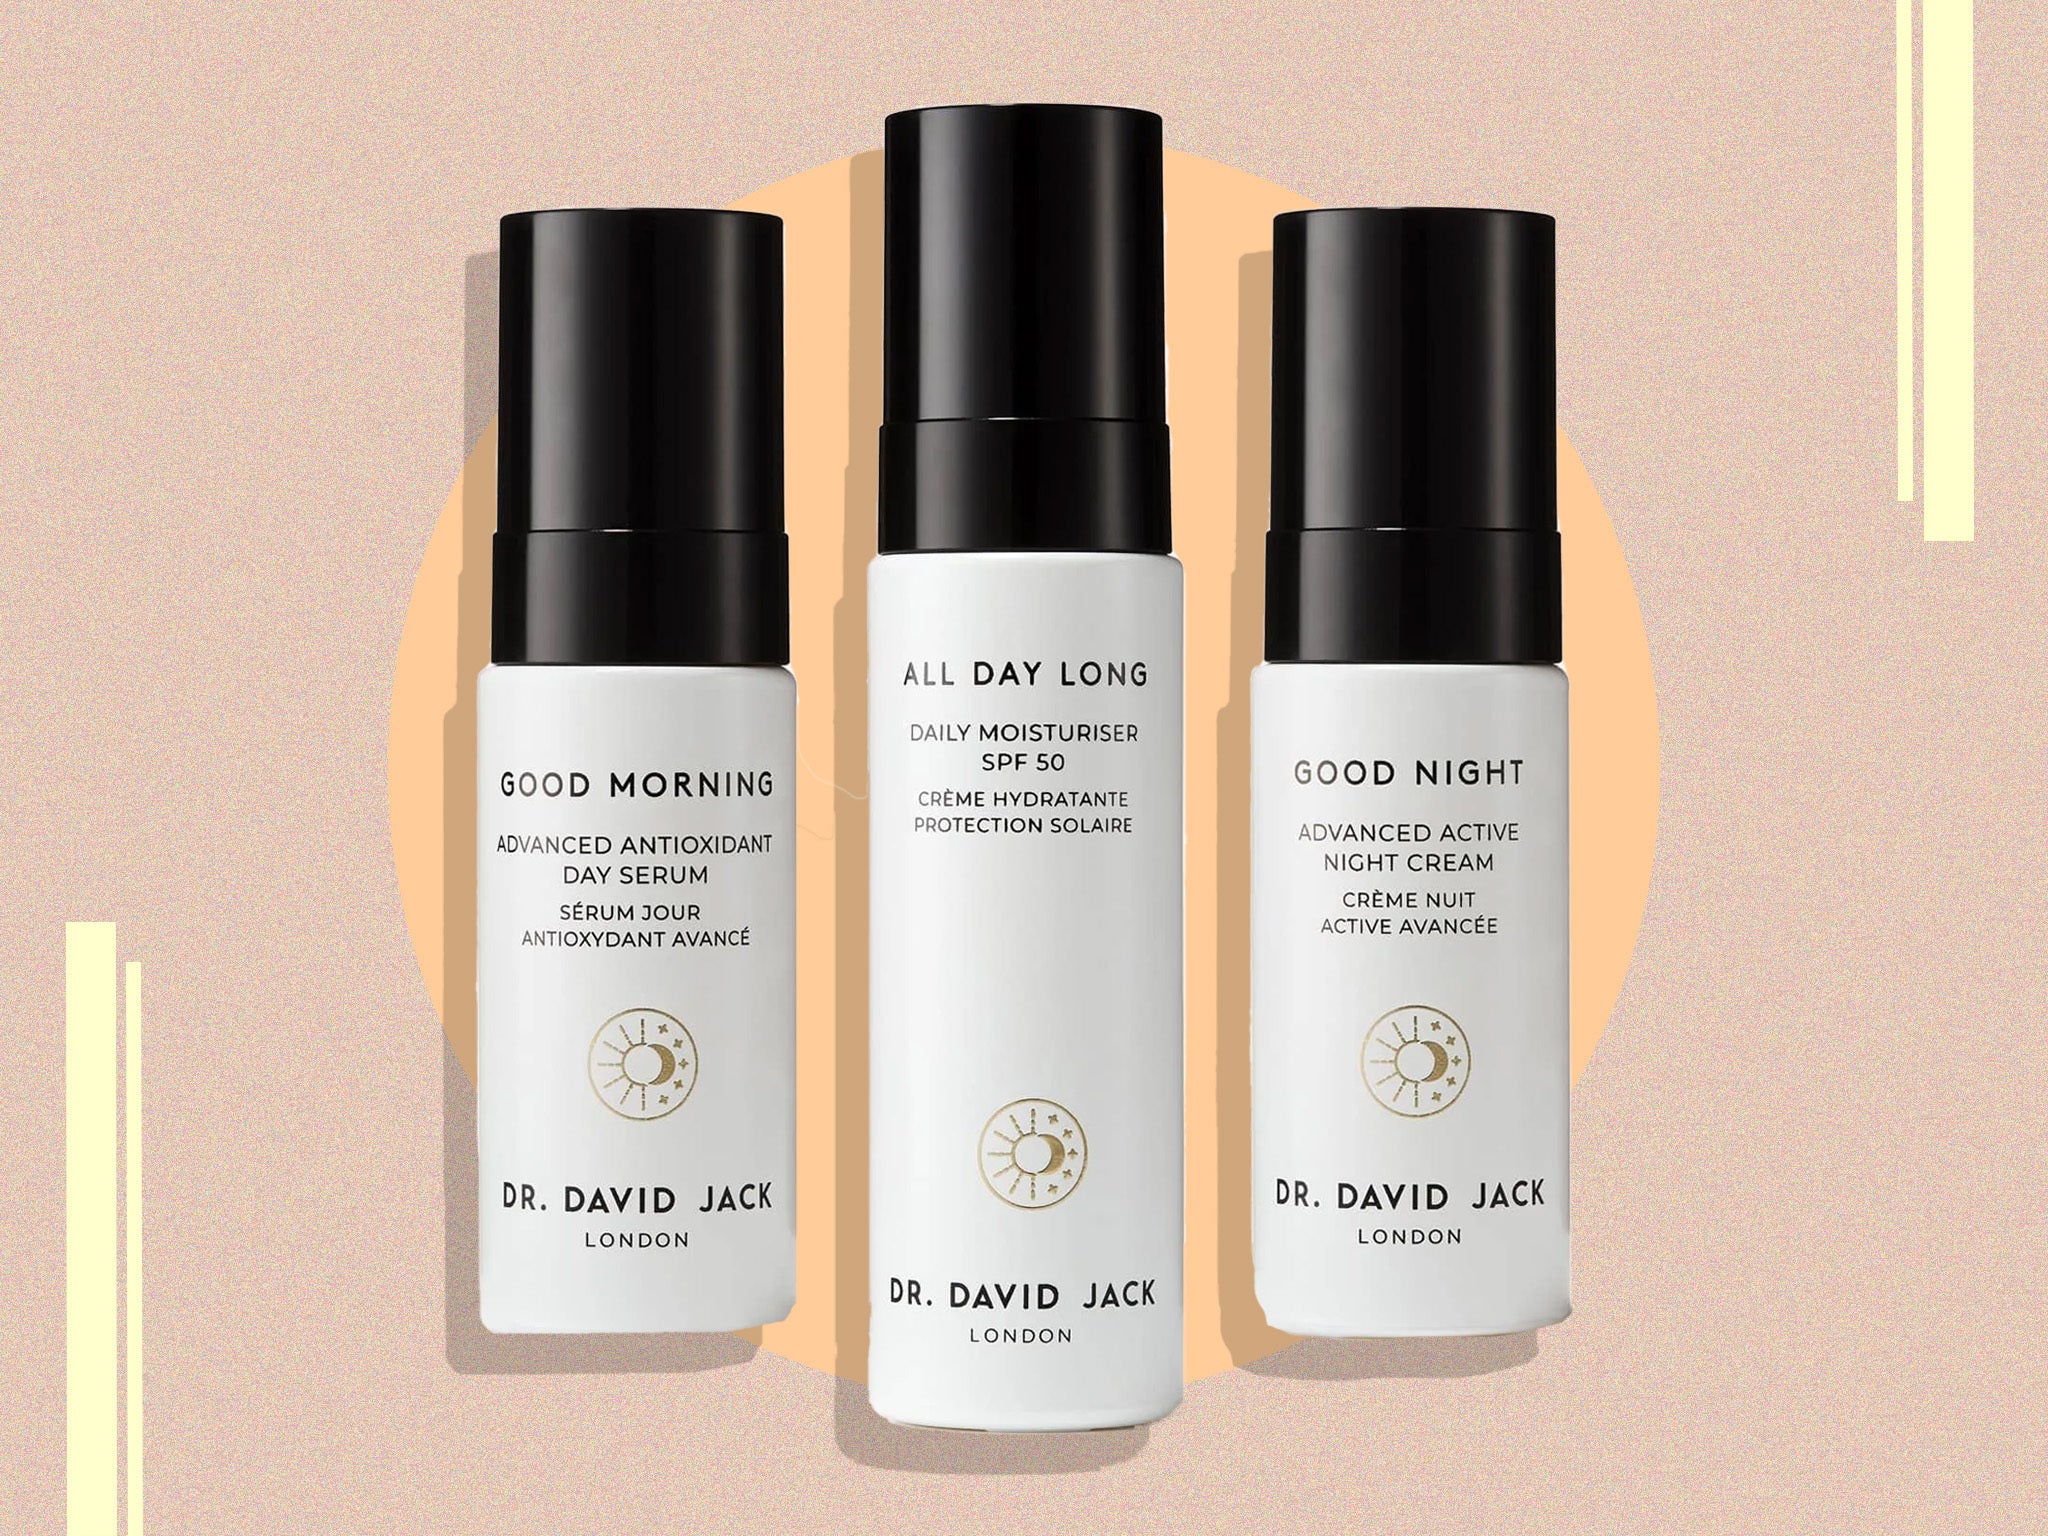 This daily skin trio claims to take the confusion out of skincare